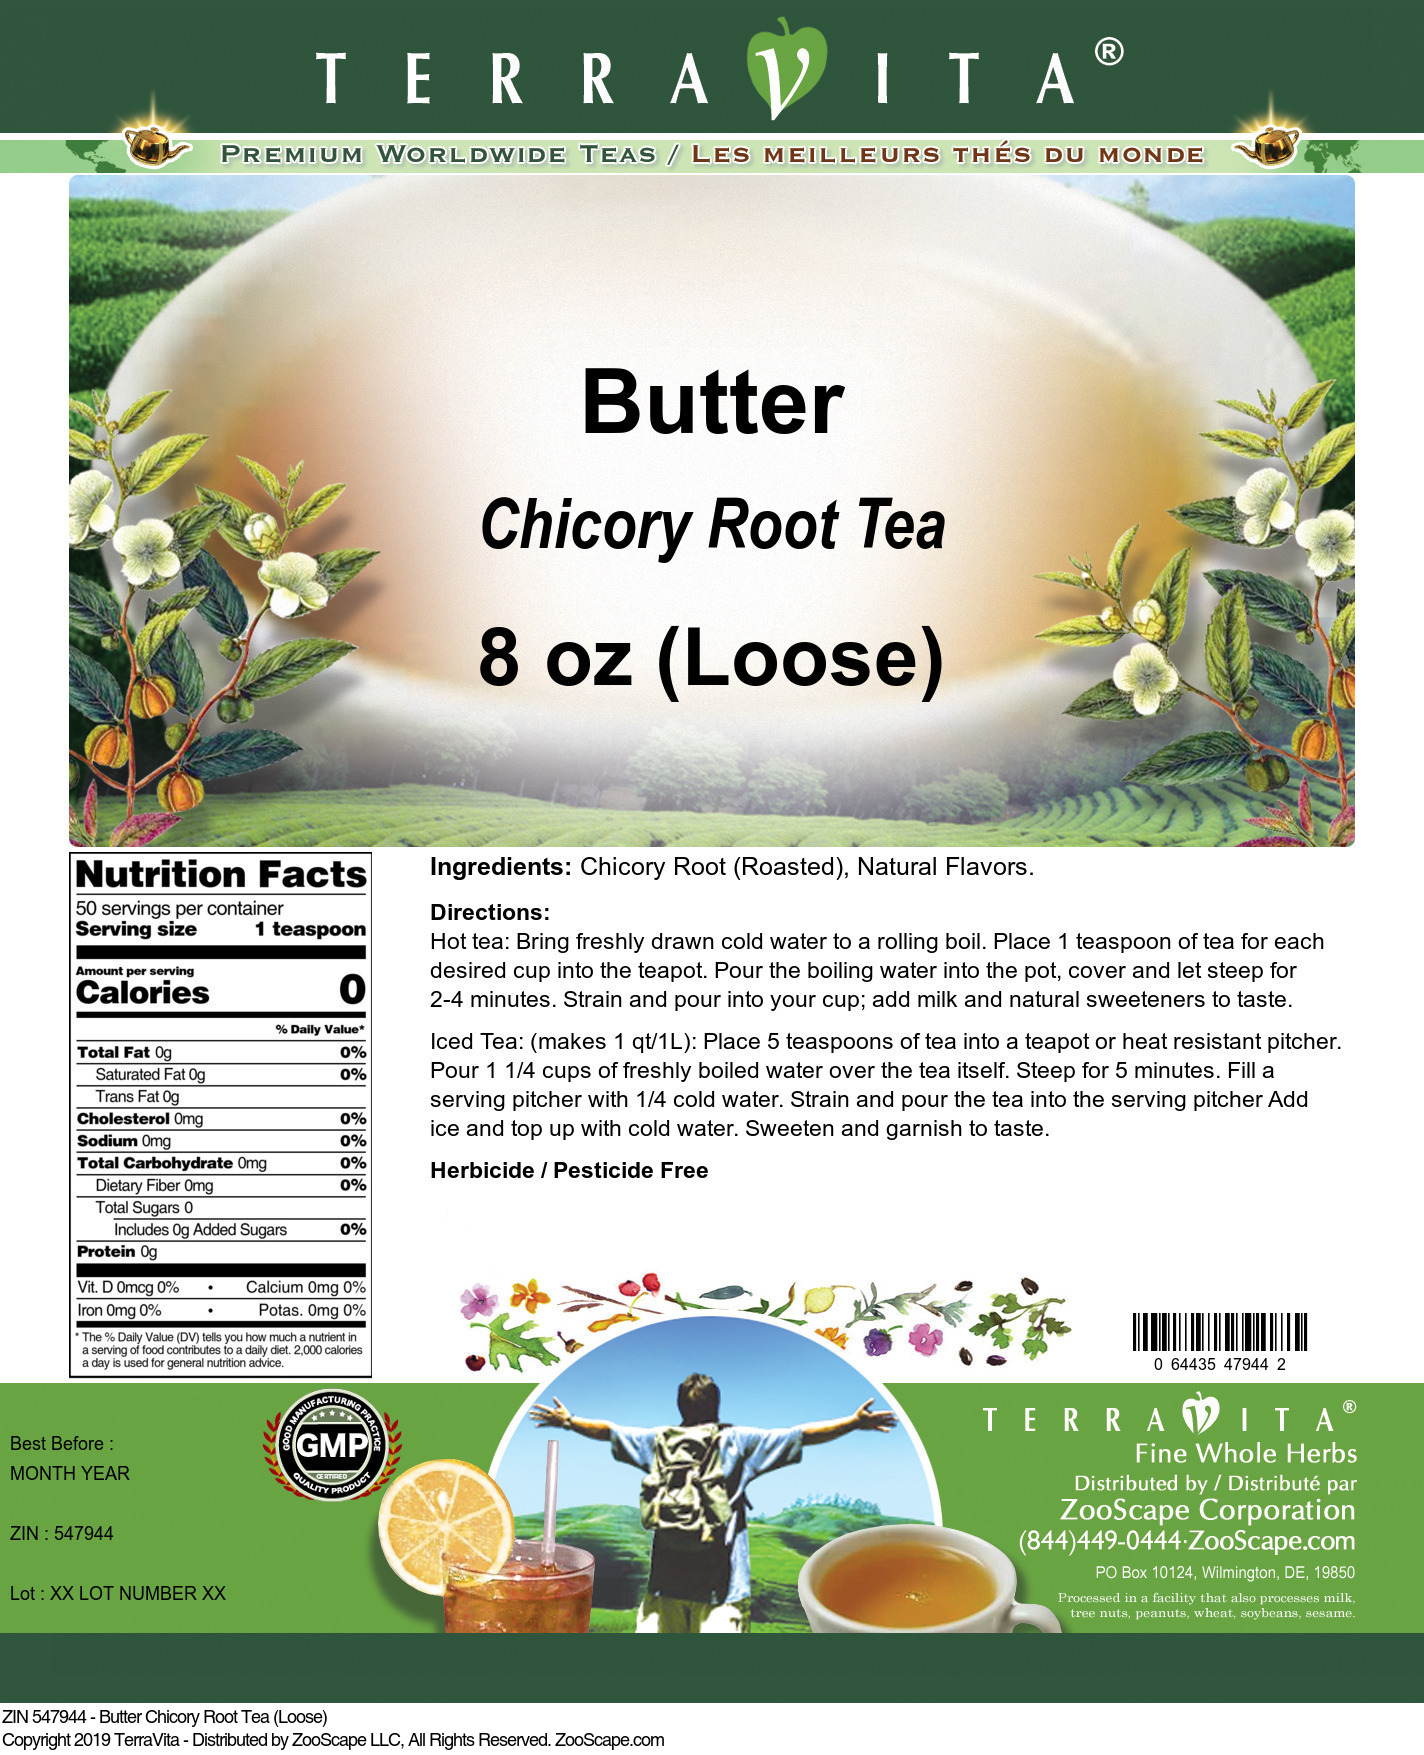 Butter Chicory Root Tea (Loose) - Label